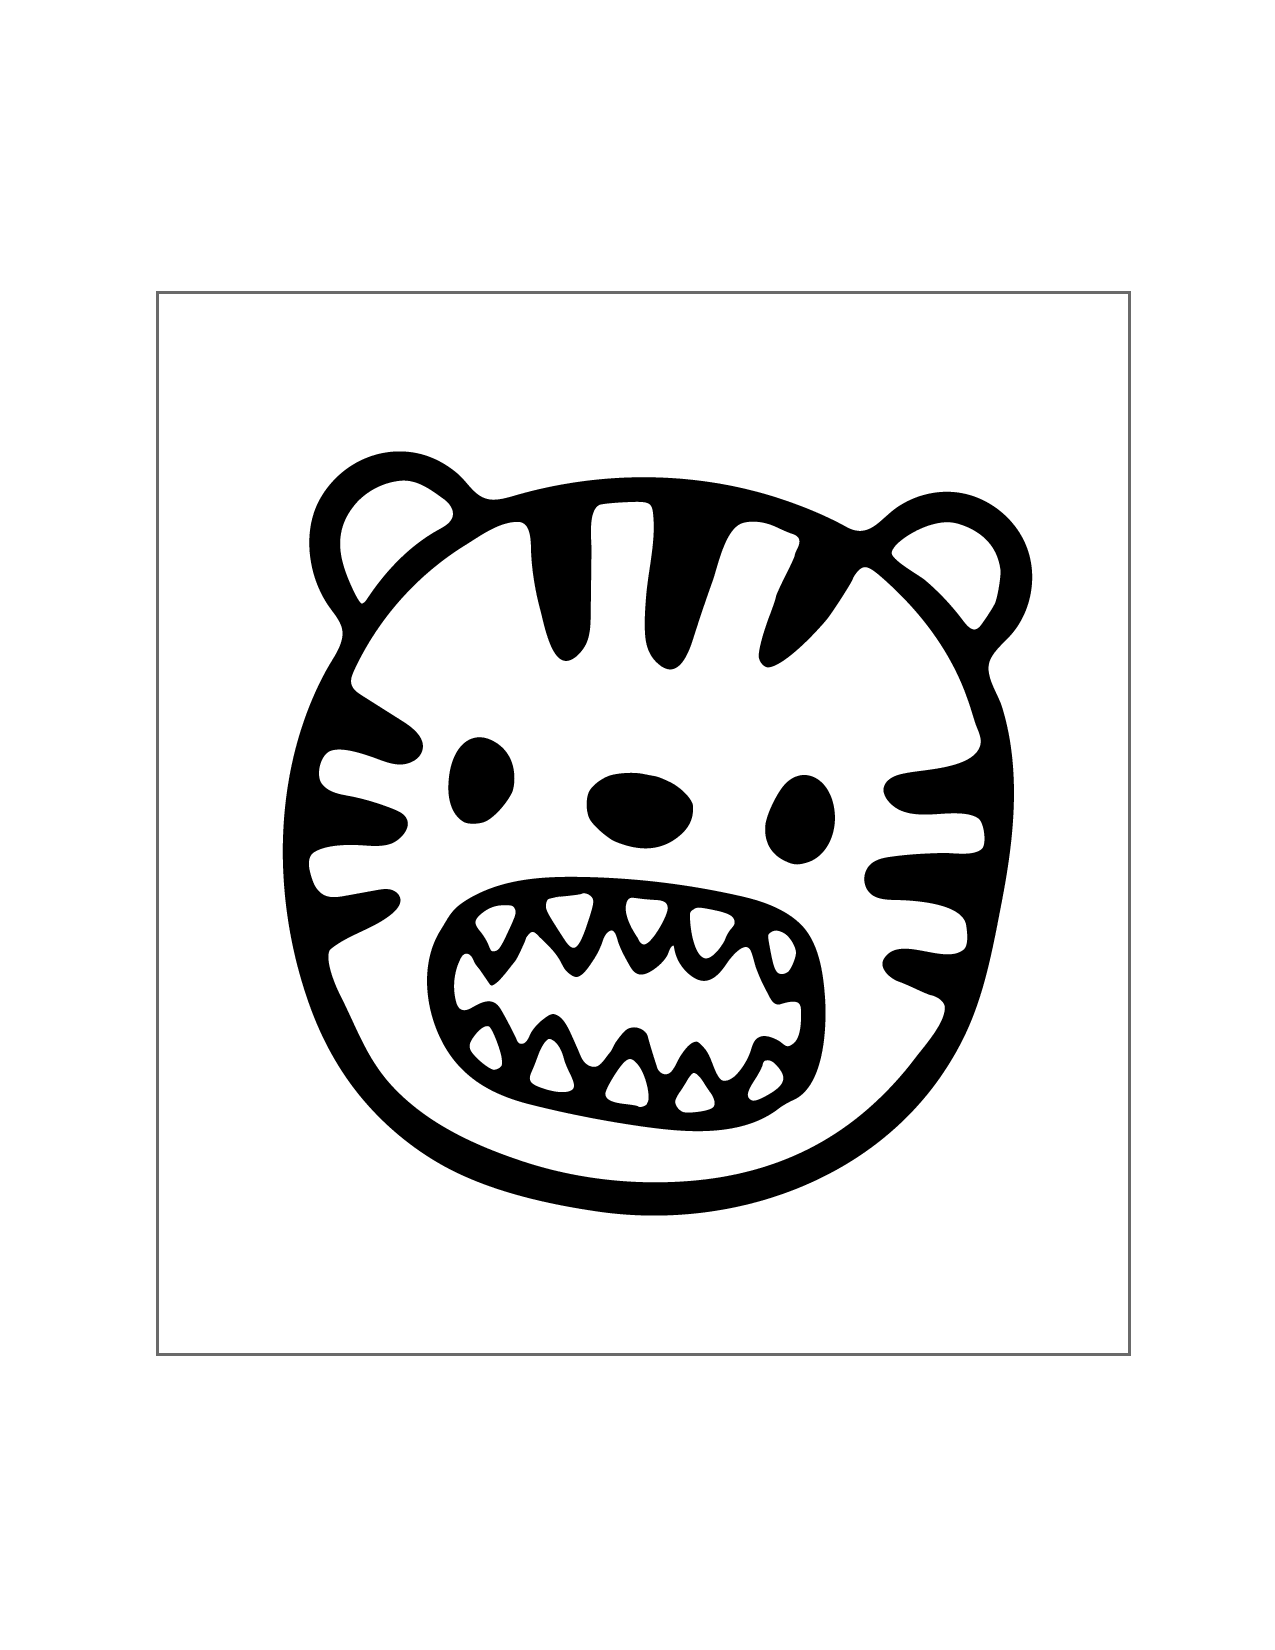 Adorable Growling Cartoon Tiger Coloring Page